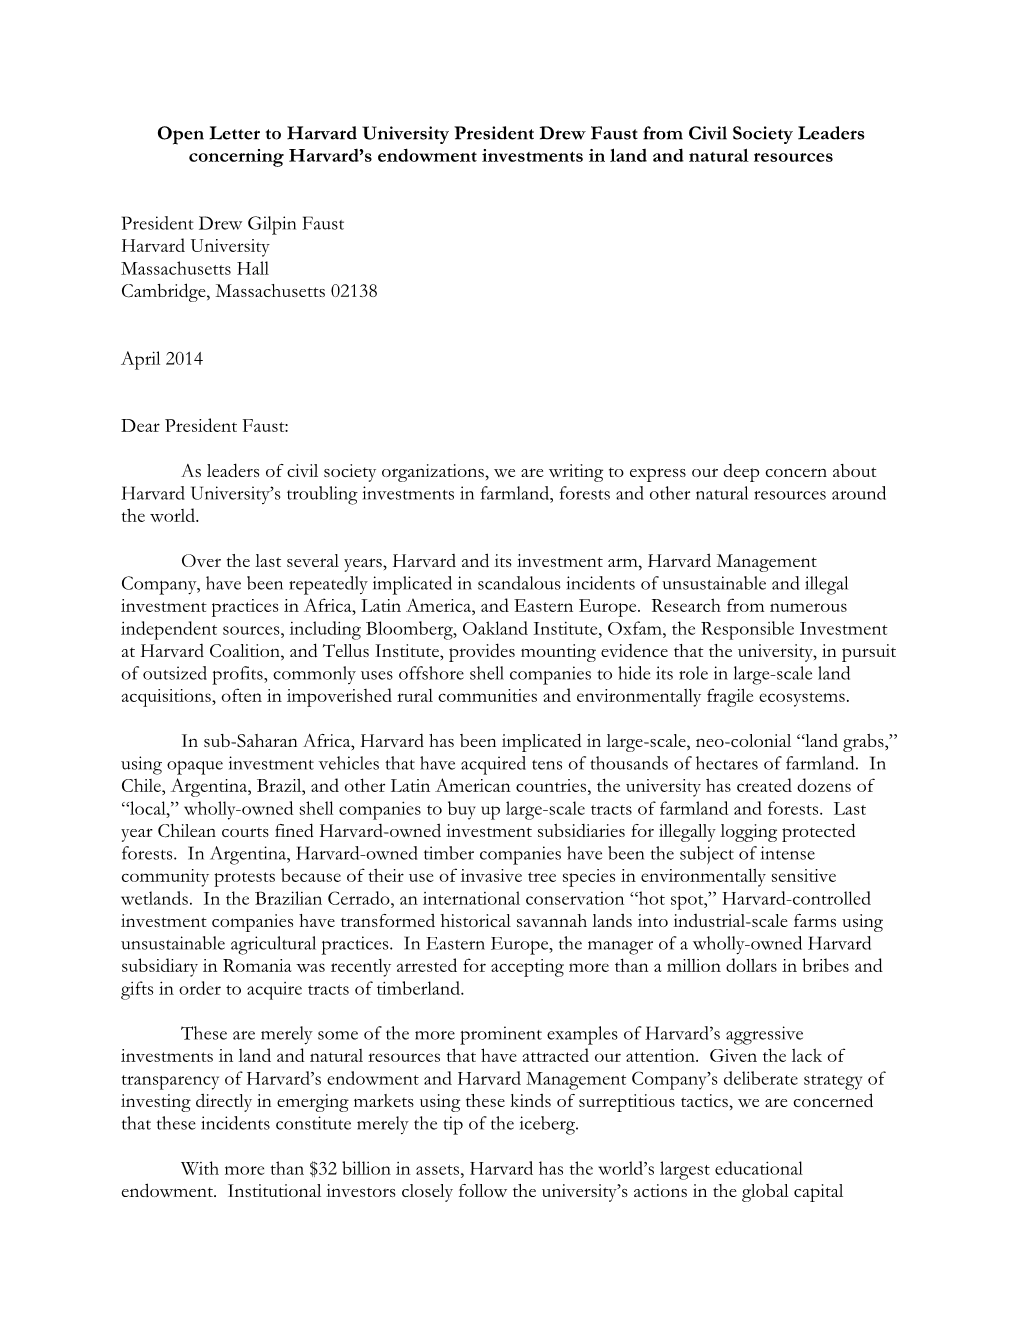 Open Letter to Harvard University President Drew Faust from Civil Society Leaders Concerning Harvard’S Endowment Investments in Land and Natural Resources